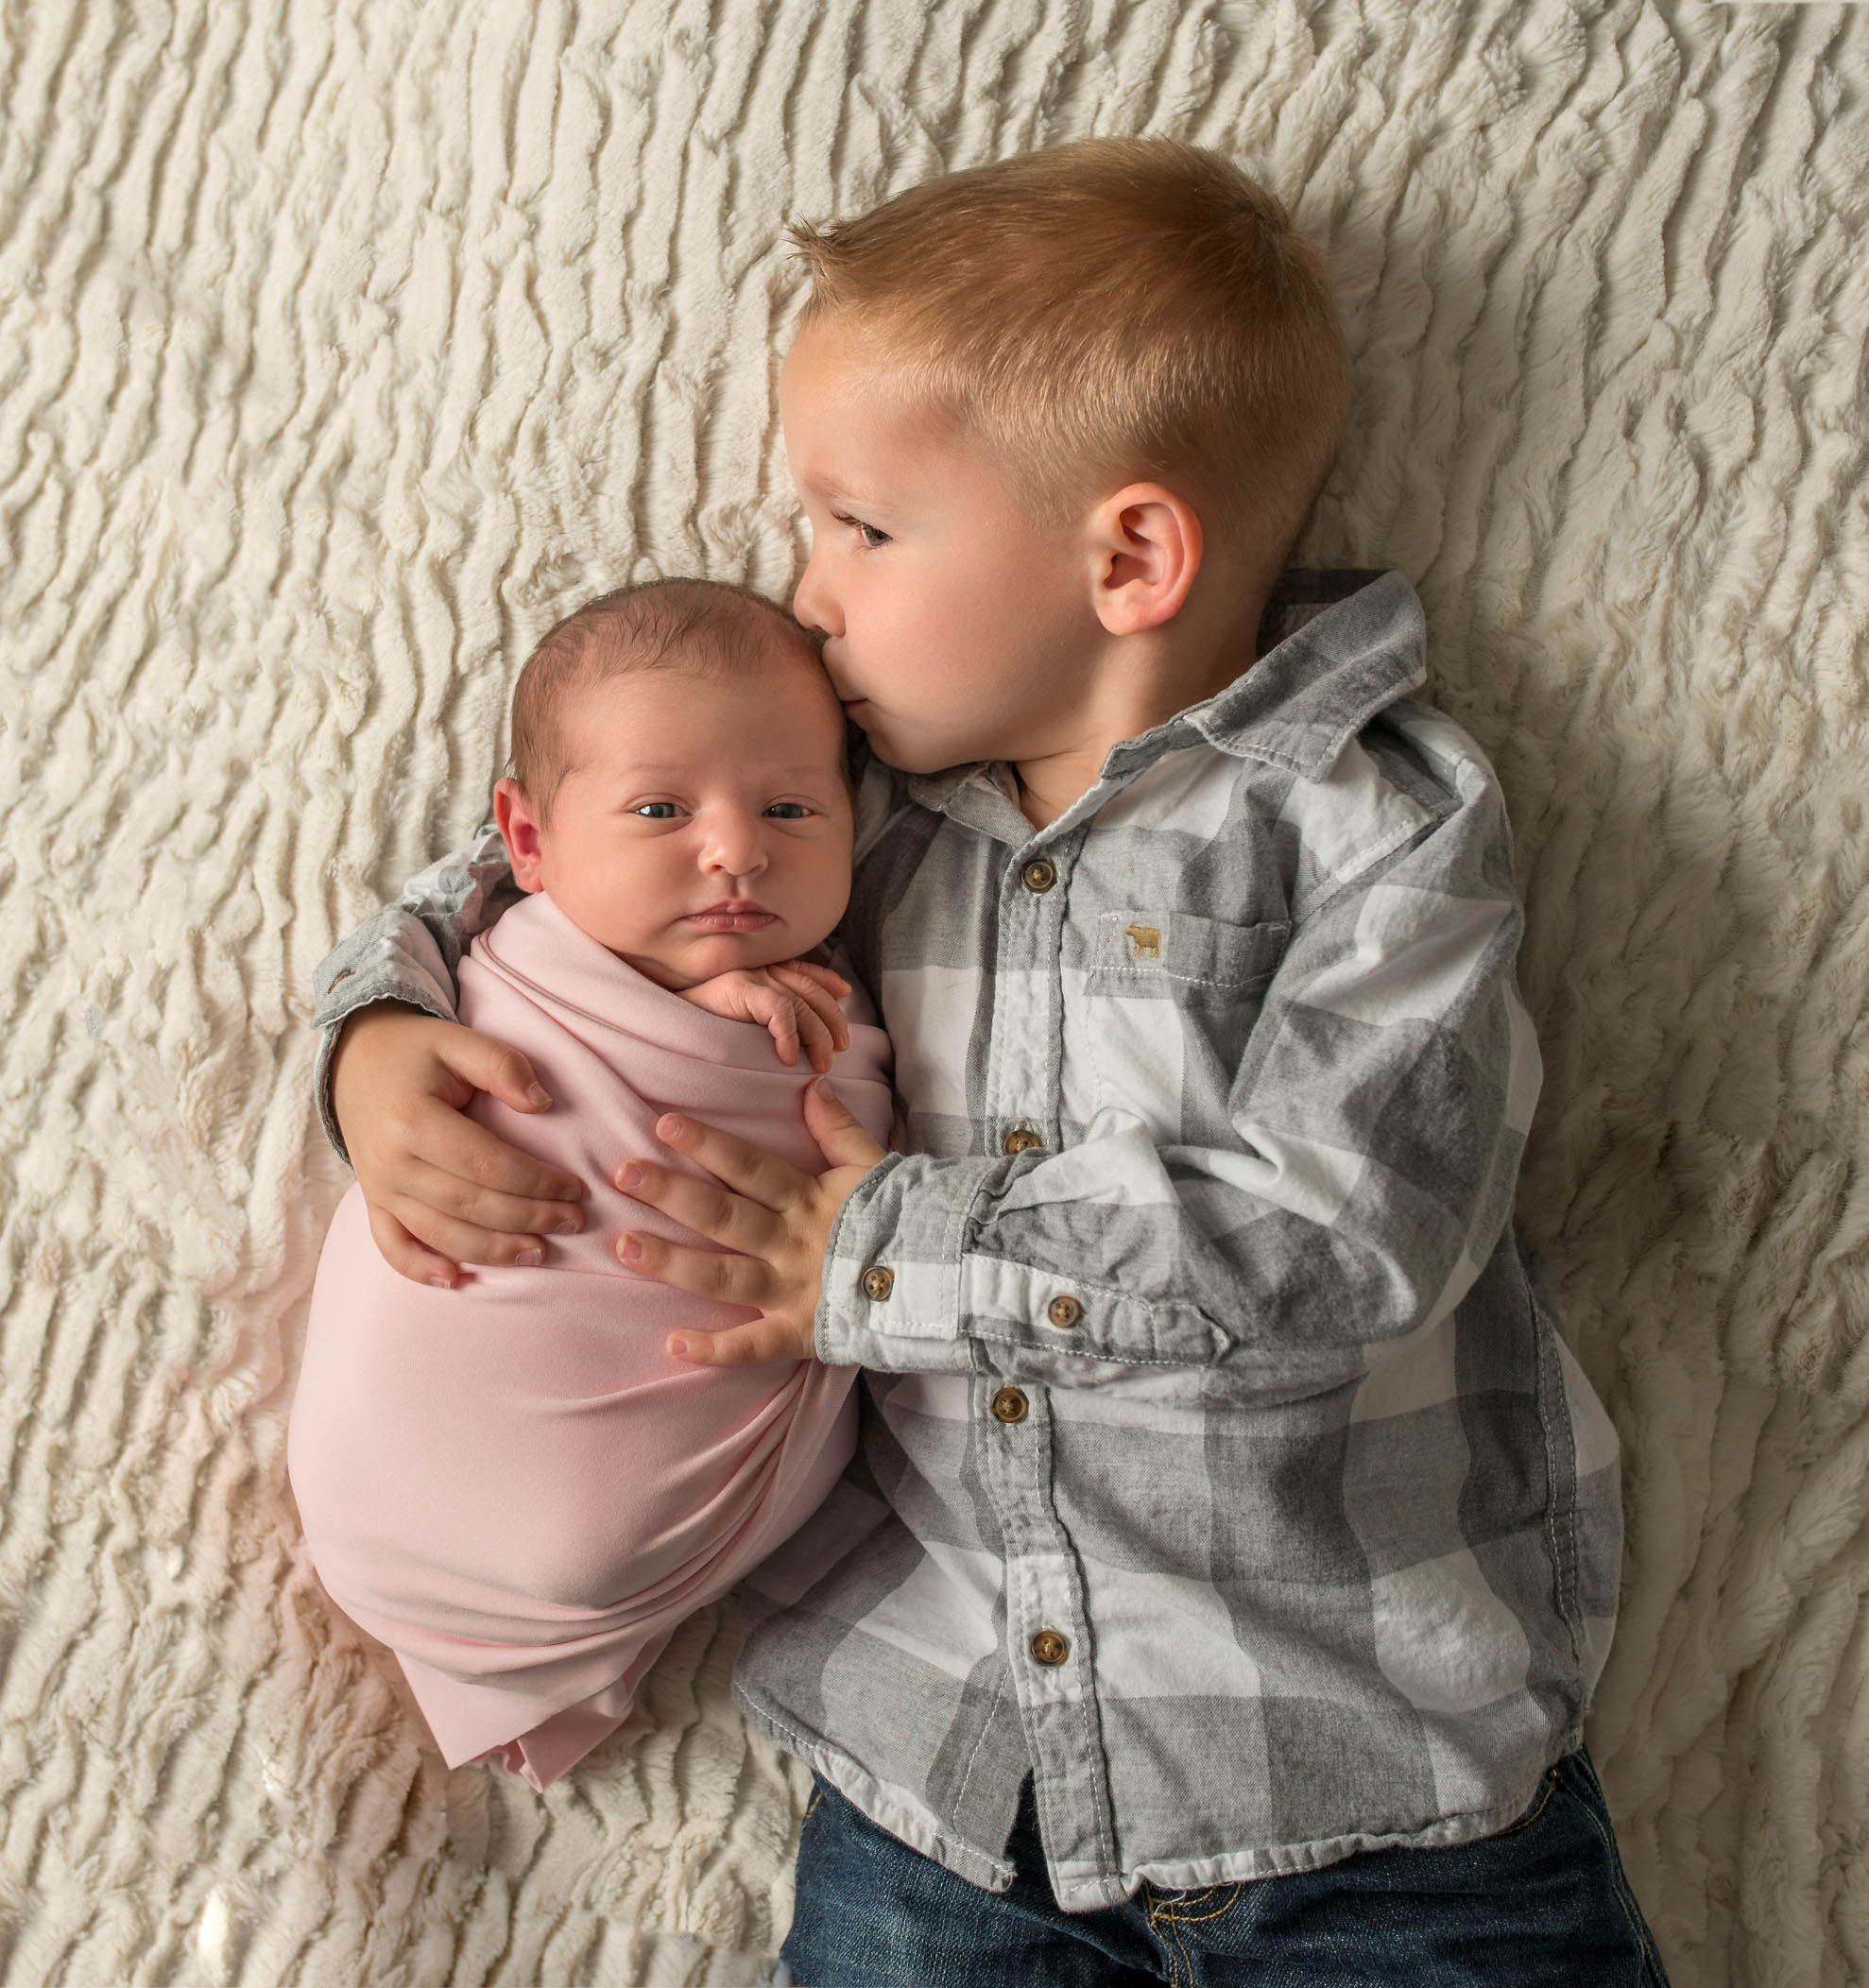 4 year old big brother holding newborn baby sister and kissing her